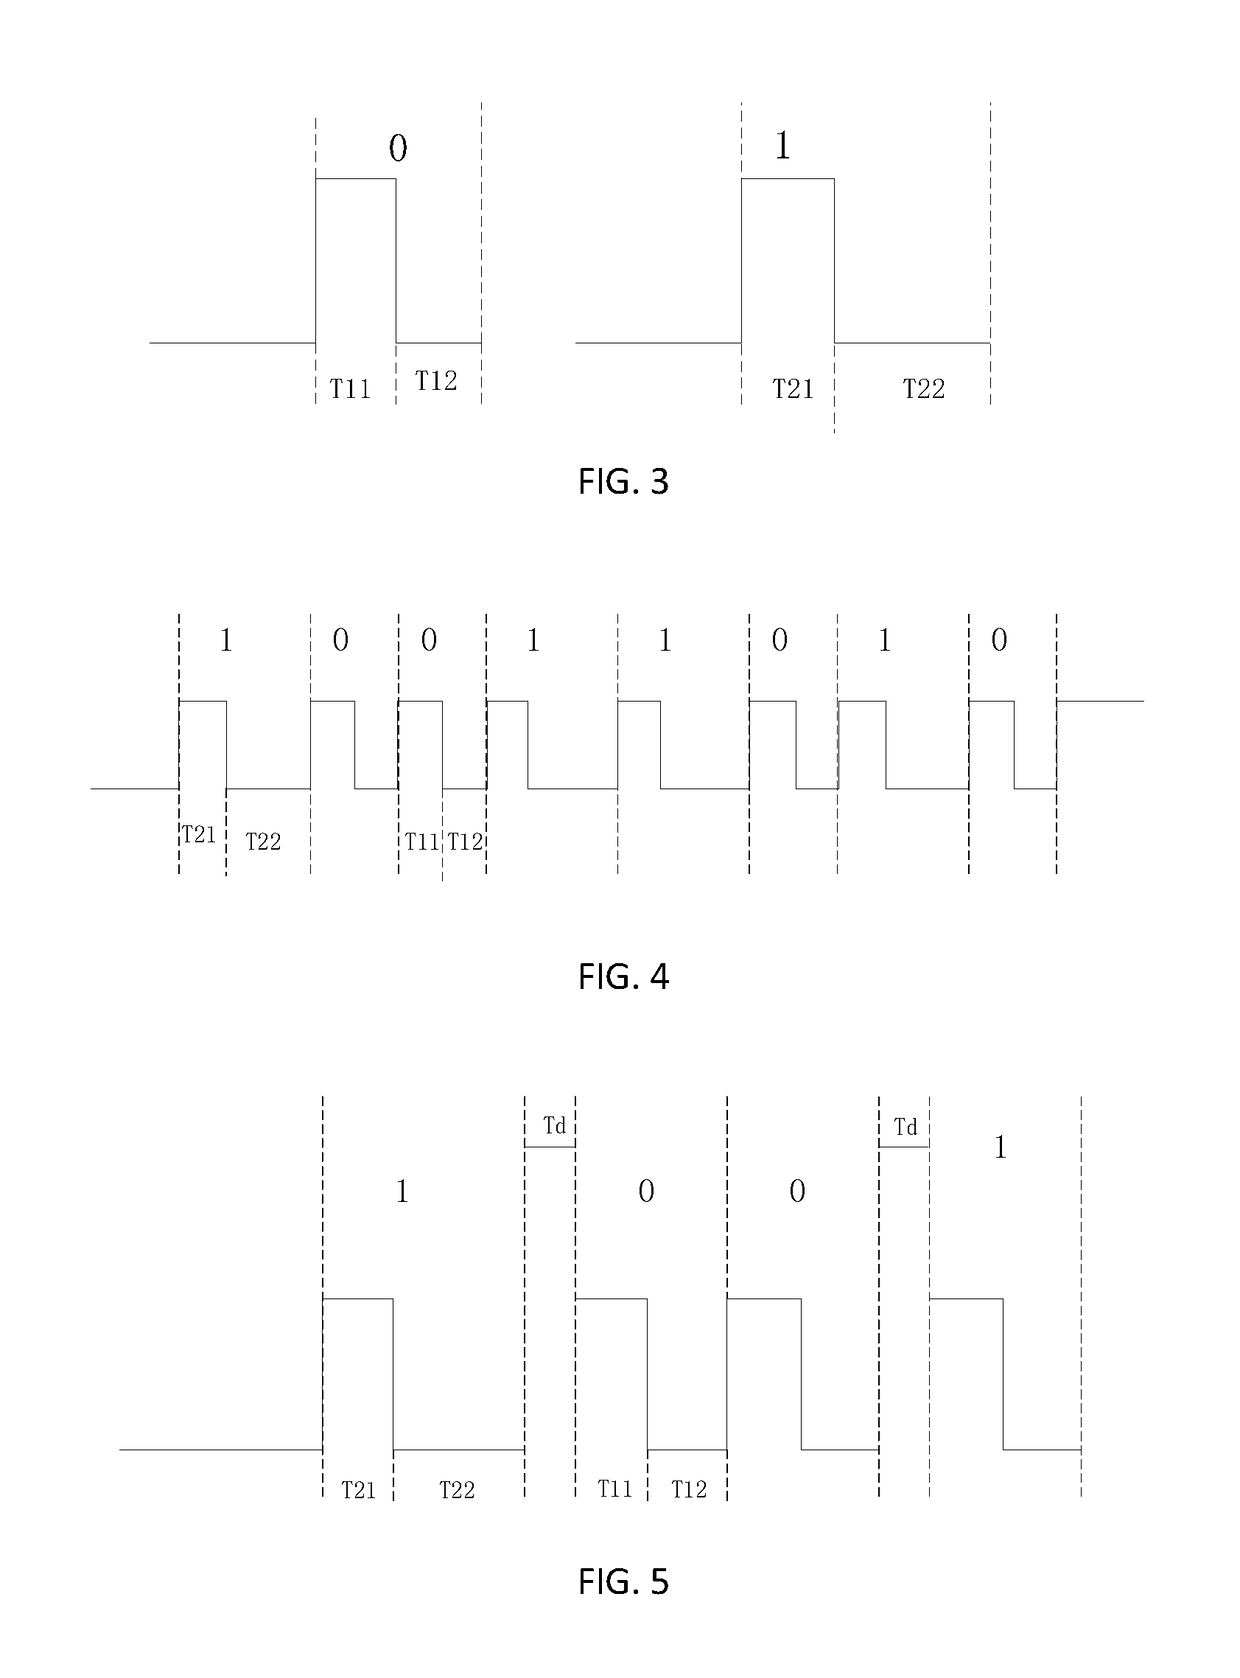 Methods and devices for optical signal encoding and decoding